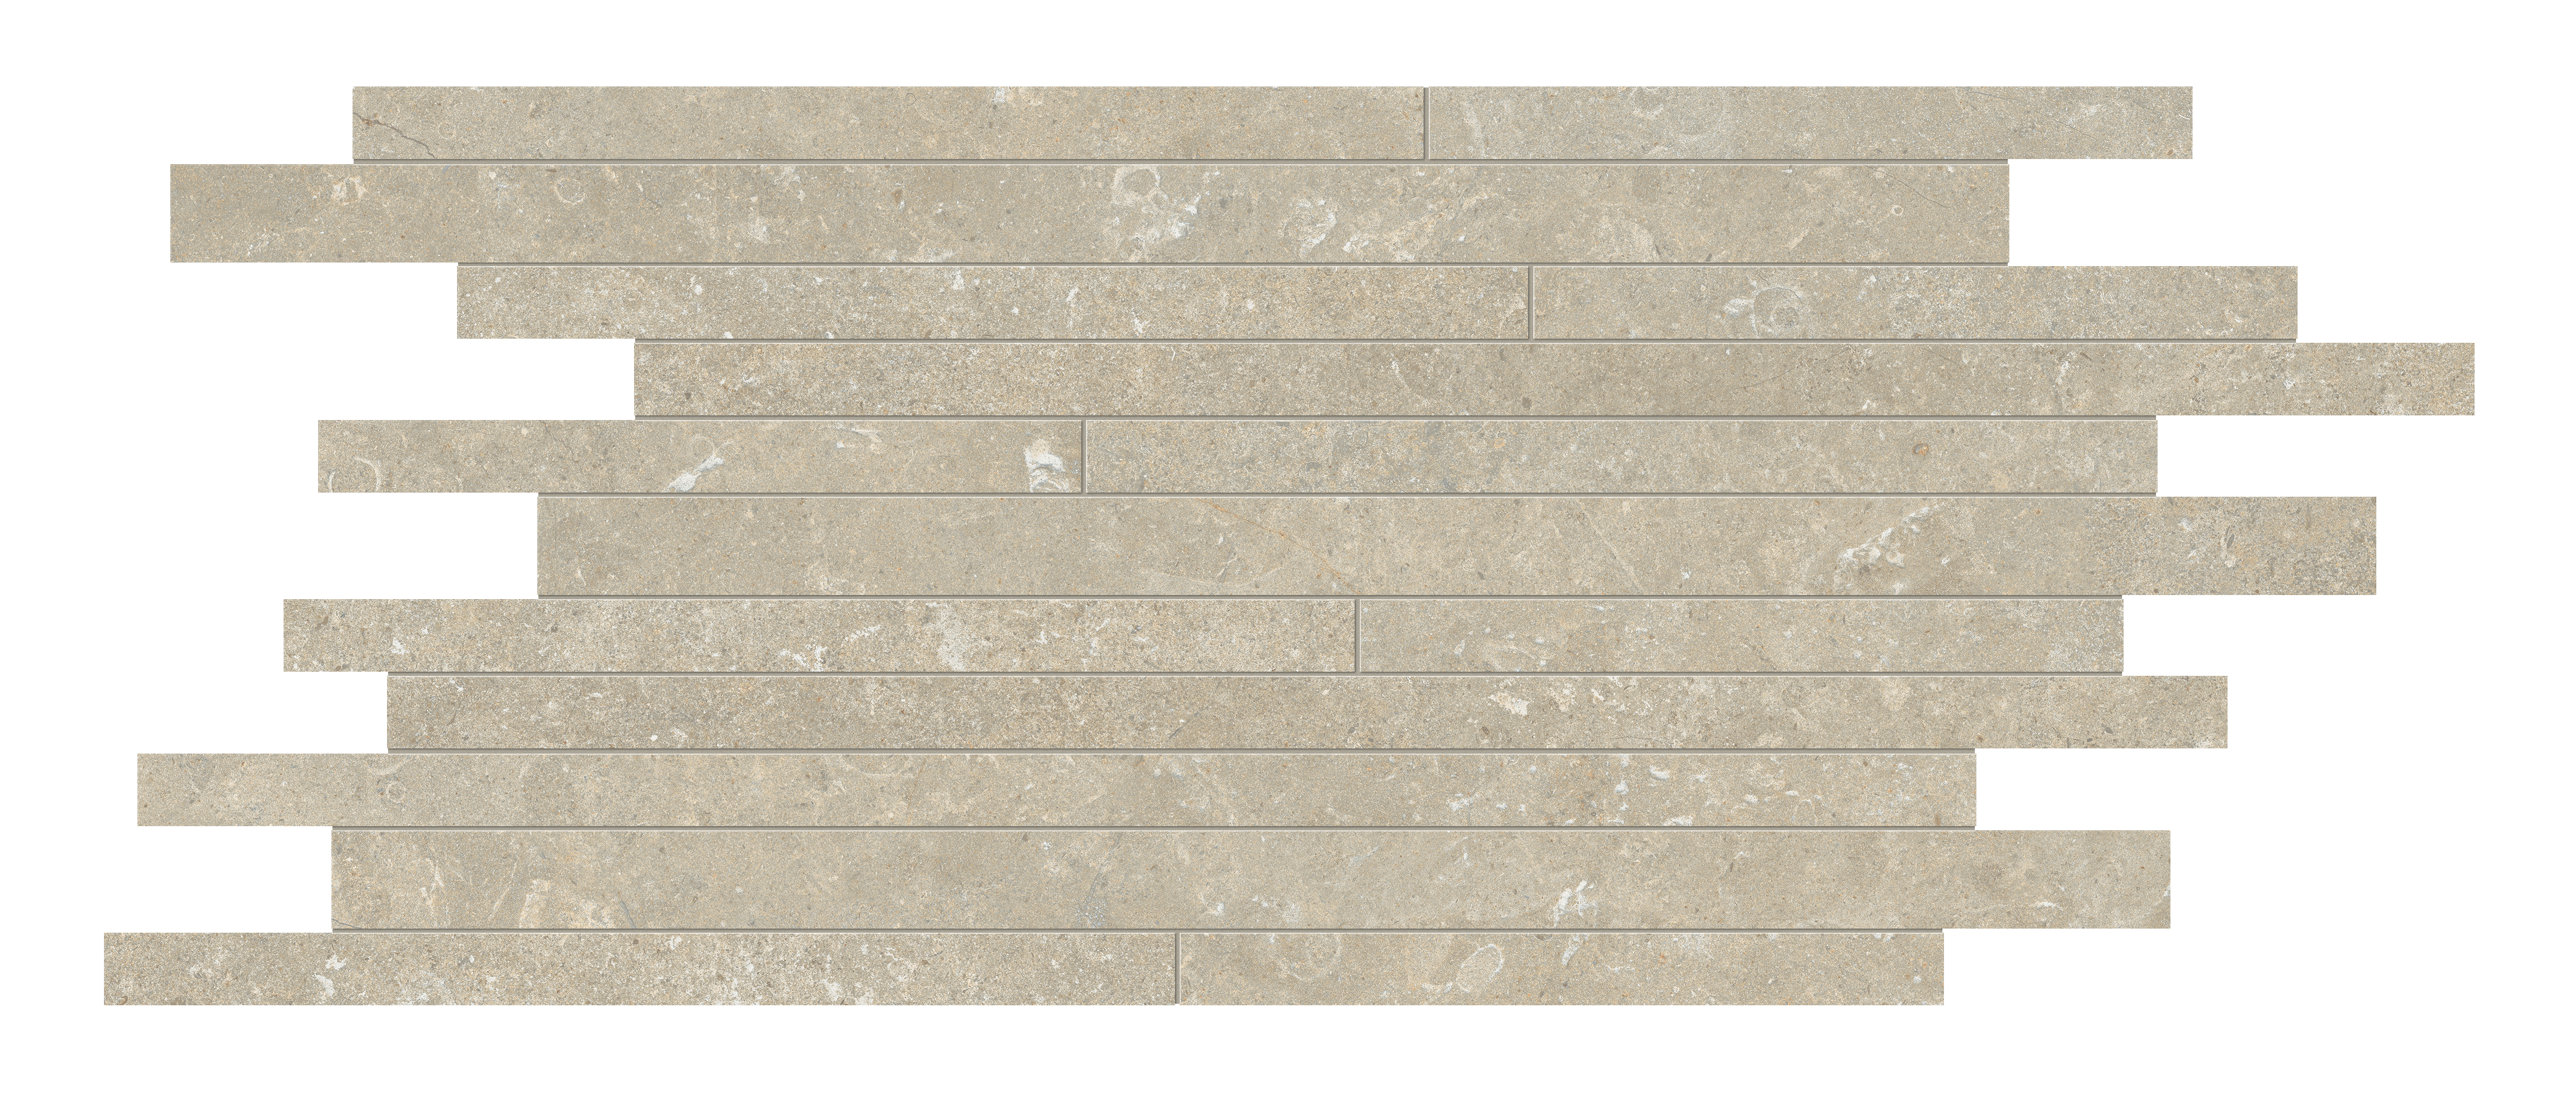 Marca Corona Arkistyle Limy Strutturato Hithick Line Tessere J282 strutturato hithick 30x60cm rectified 9mm